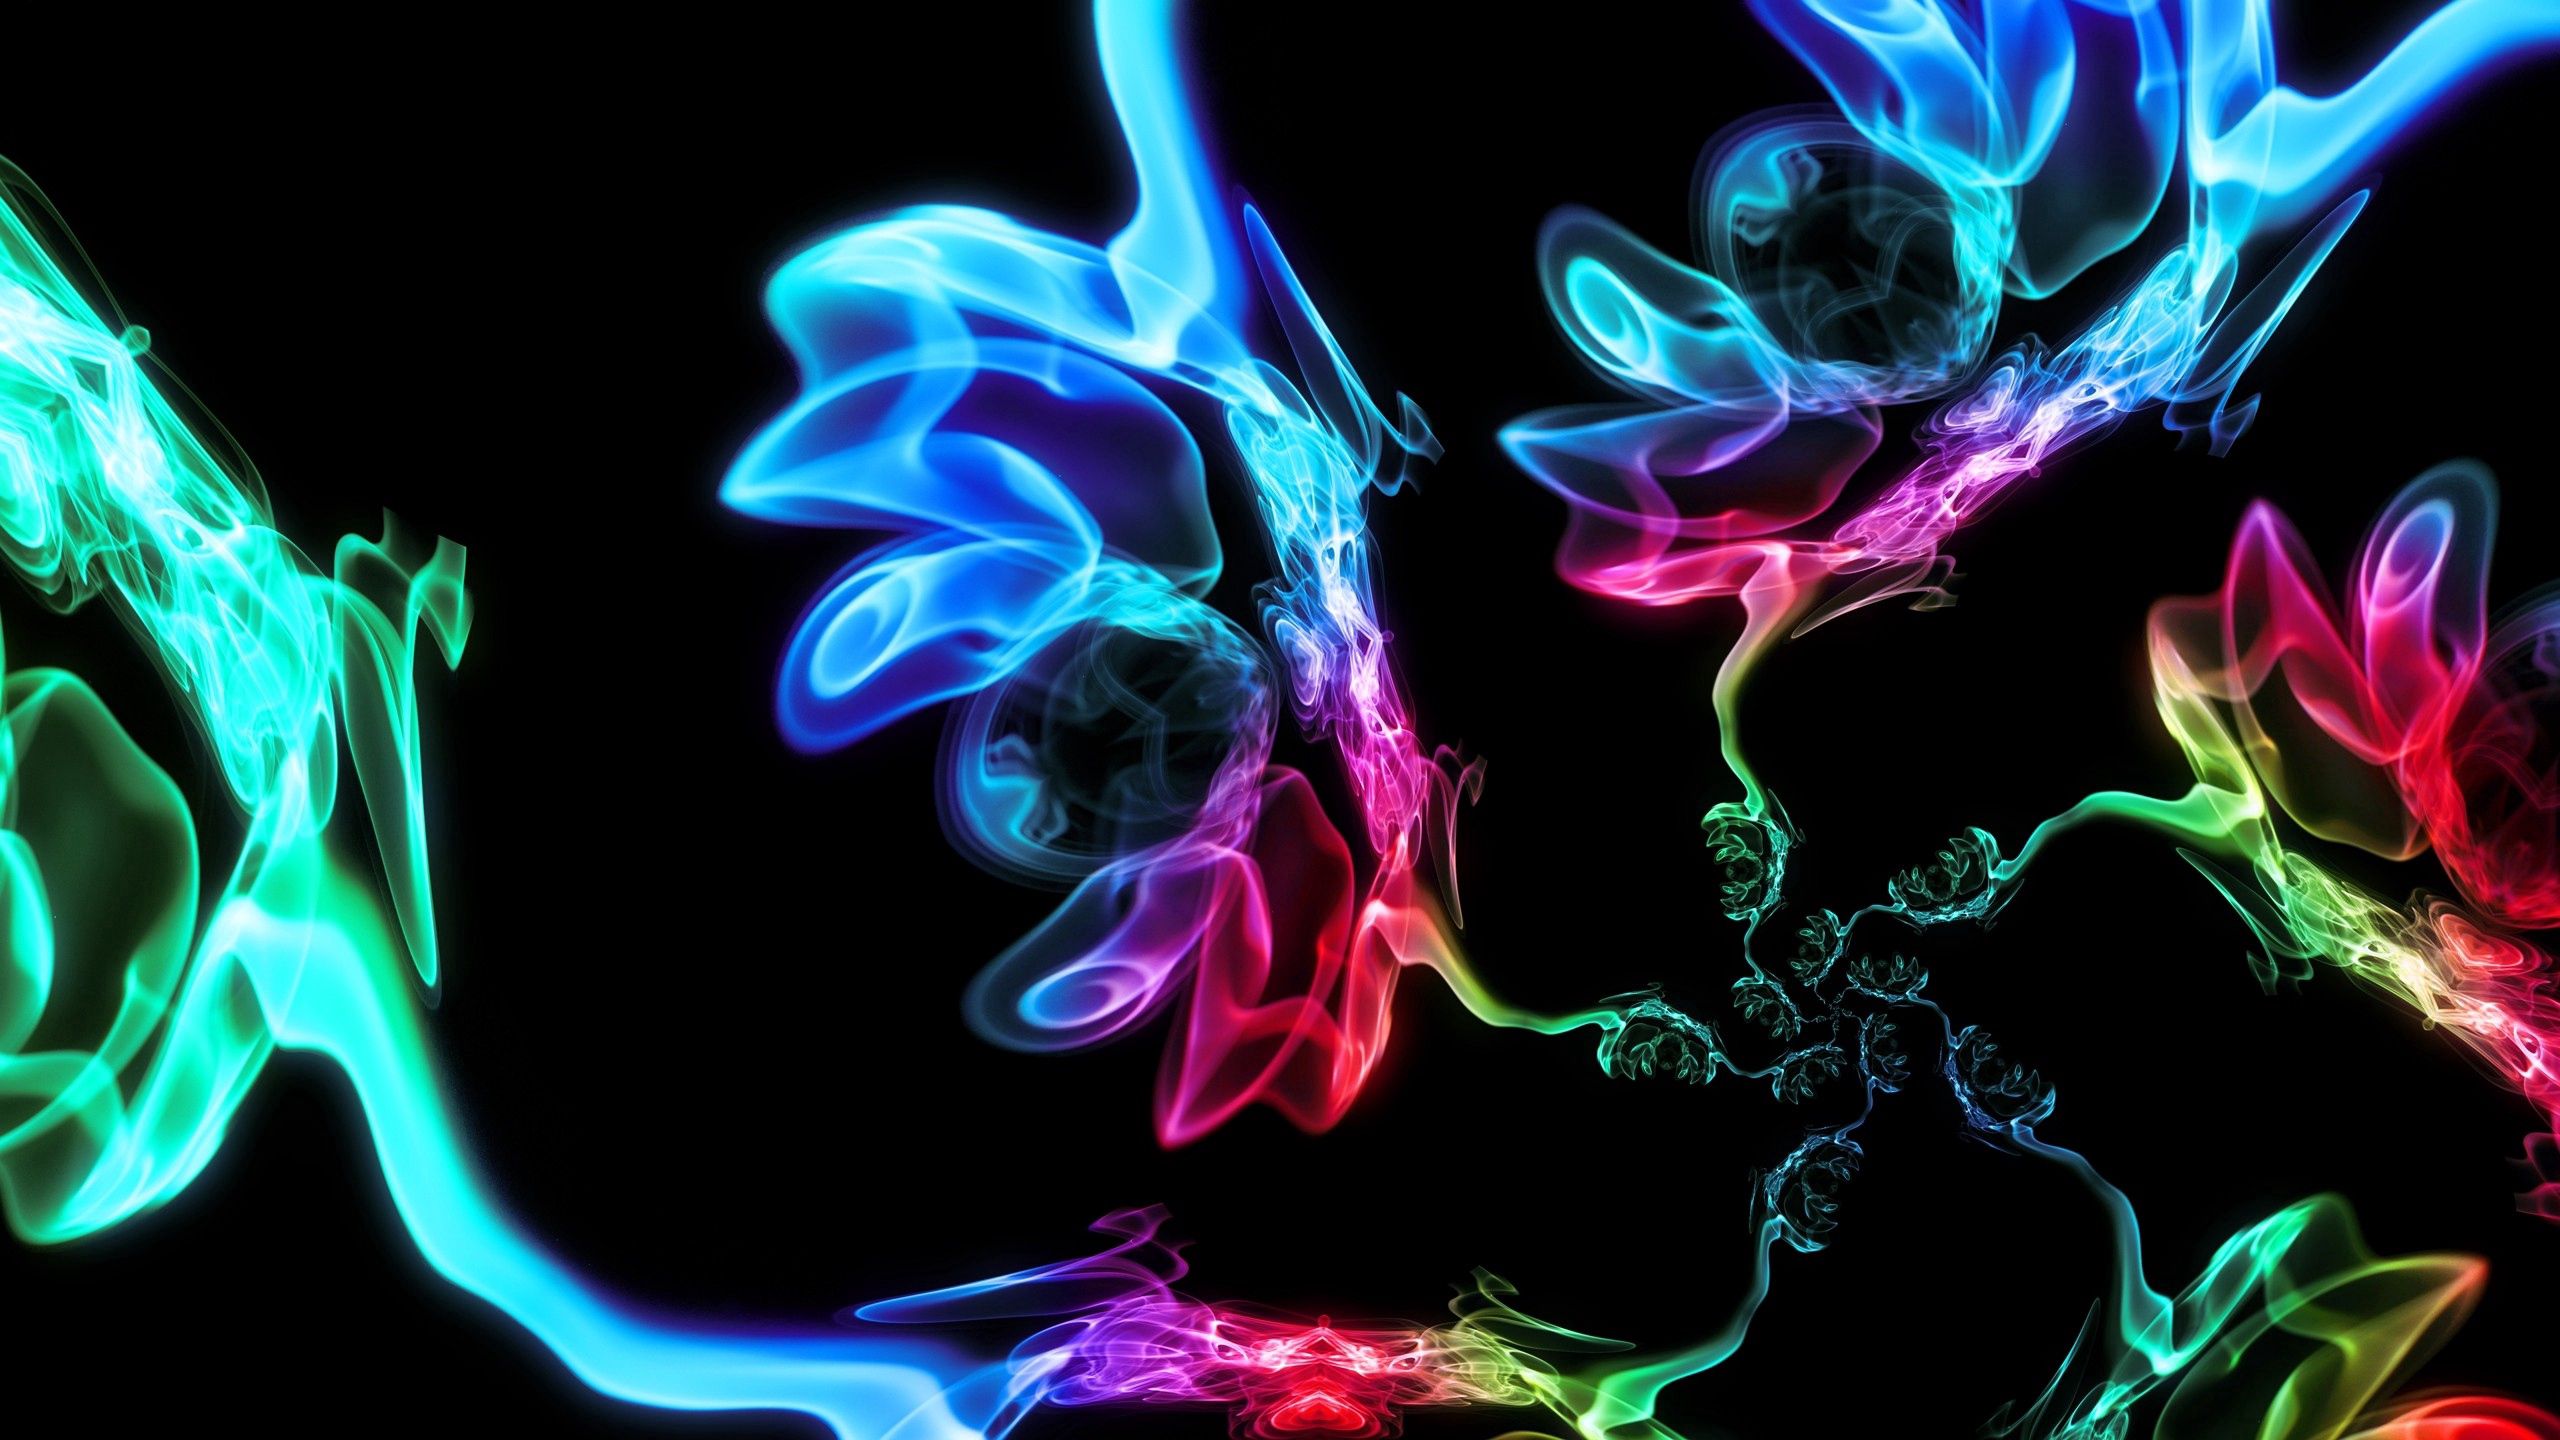 forms, motley, abstract, smoke, multicolored, dark background, form 4K Ultra